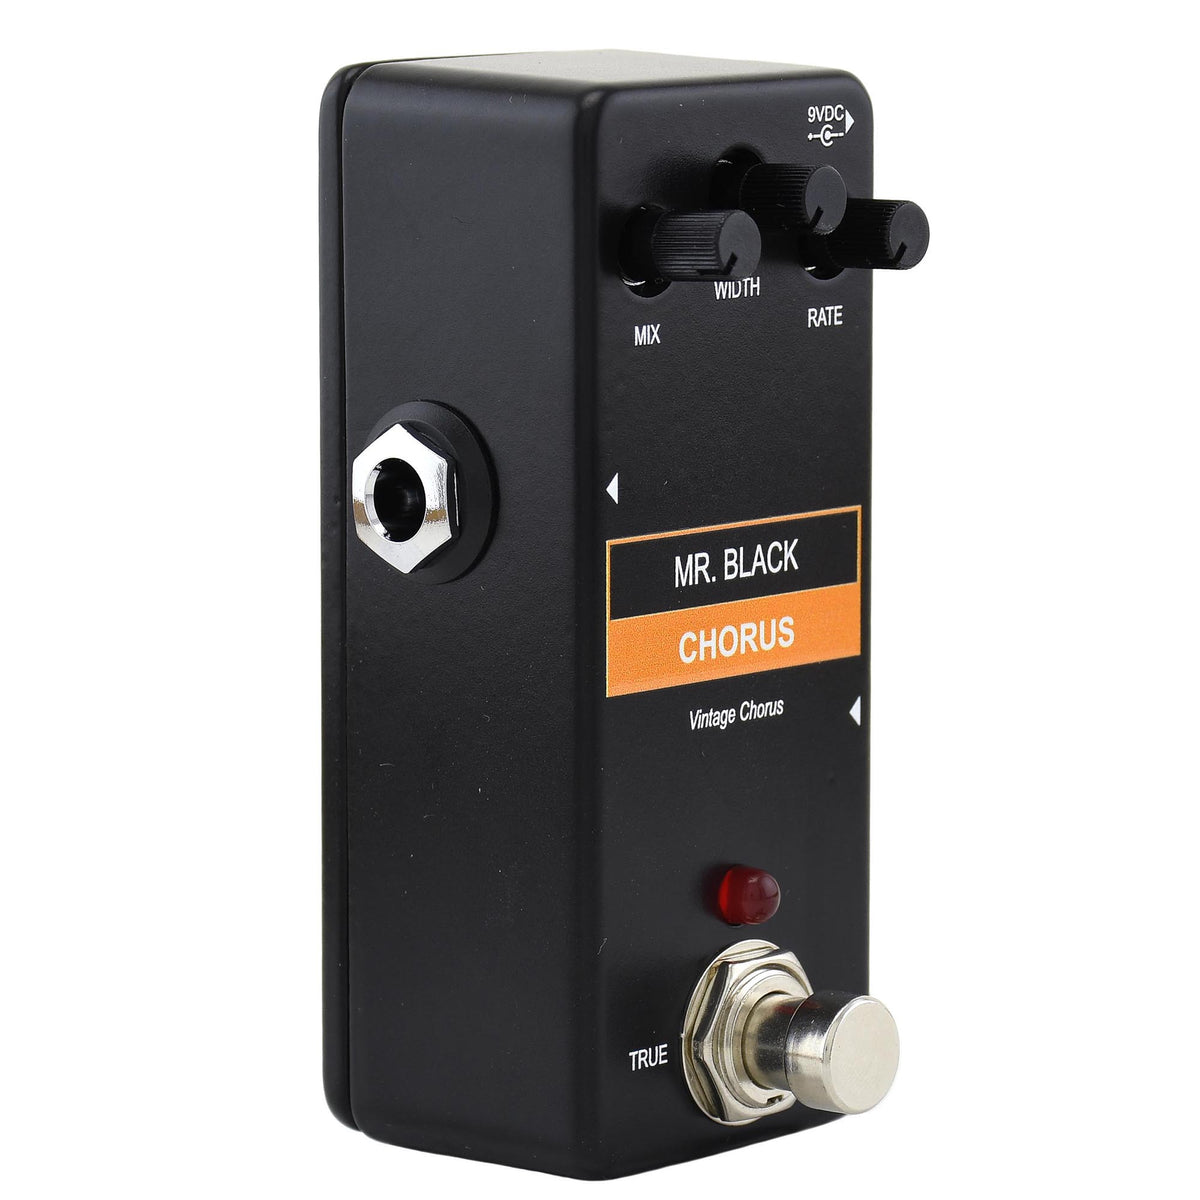 Are you looking for an Mr. Black Mini Vintage Chorus Pedal Mr Black Pedals  to buy? Move fast